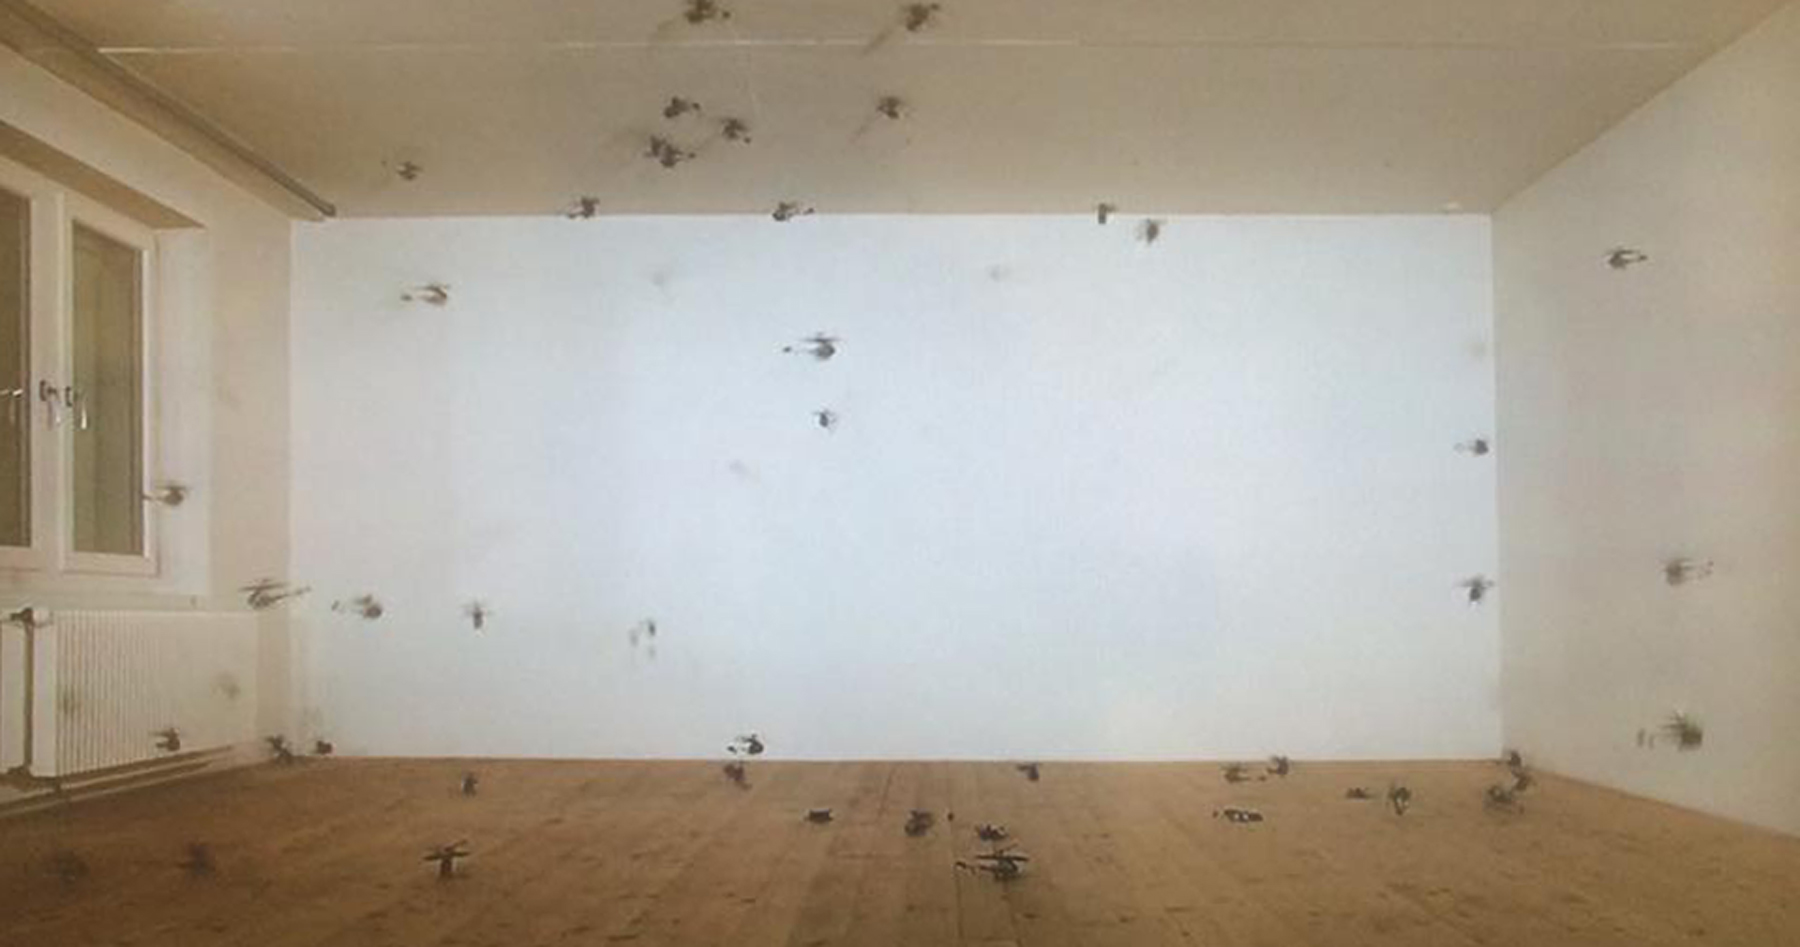   Roman Signer   56 kleine Helikopter&nbsp; (56 Small Helicopters), 2008 single channel video with sound 